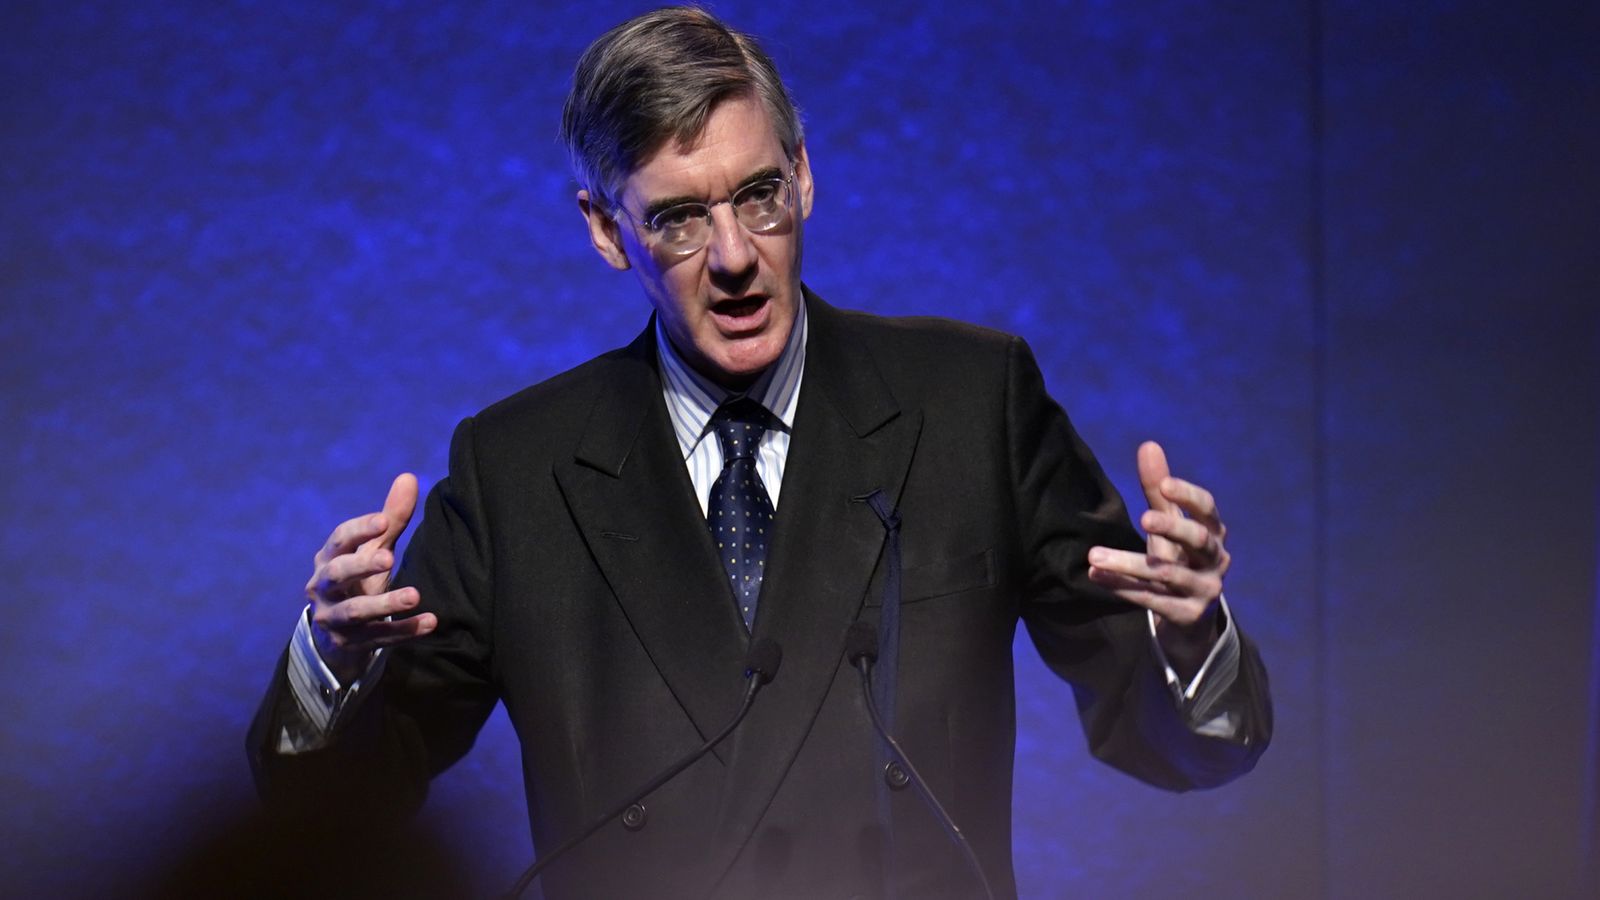 Jacob Rees-Mogg suggests requiring photo ID to vote was attempt to 'gerrymander' which 'came back to bite' Tories